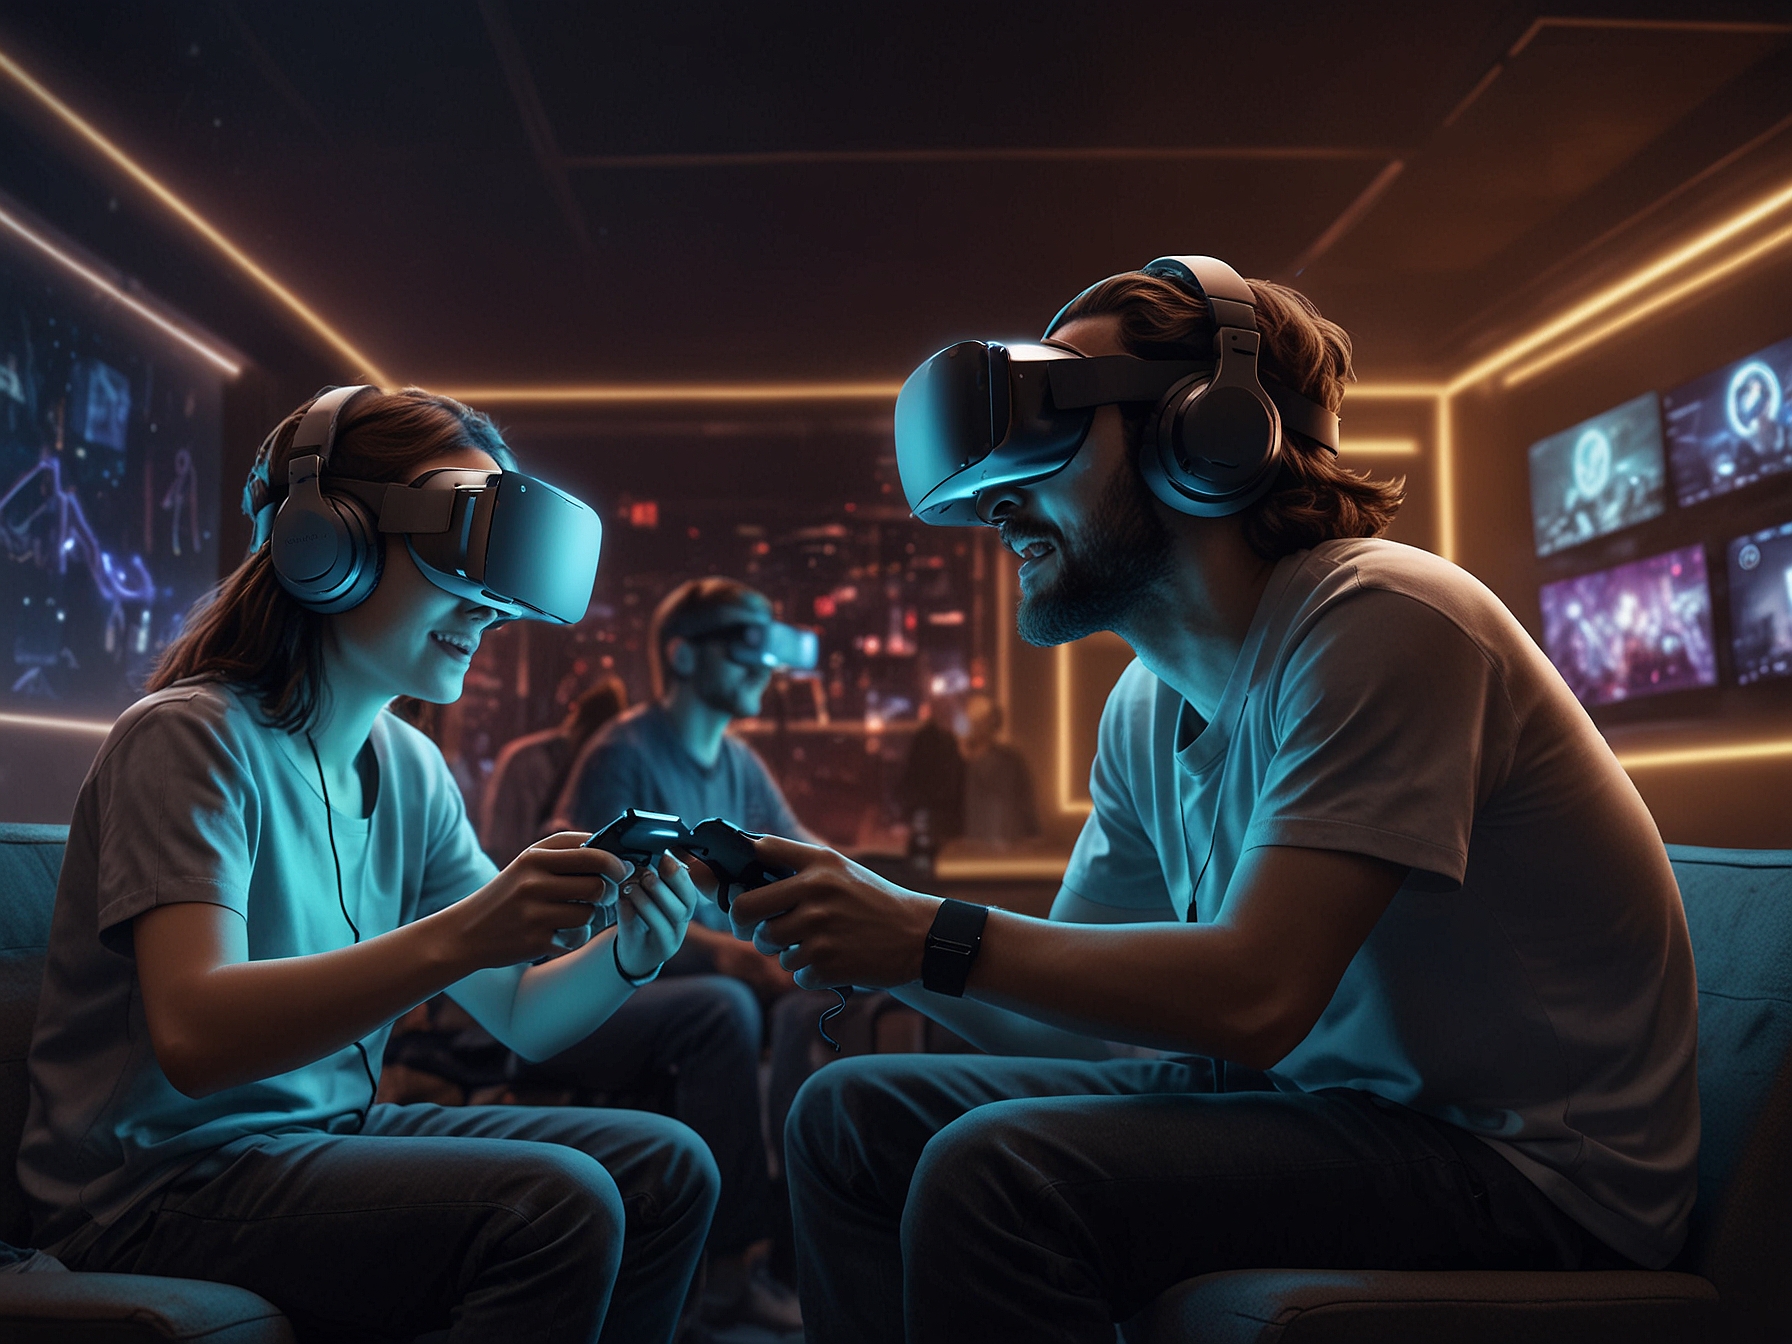 Image of gamers wearing VR headsets engaging in immersive gameplay, illustrating the current state and potential future of virtual reality within Sony's gaming ecosystem.